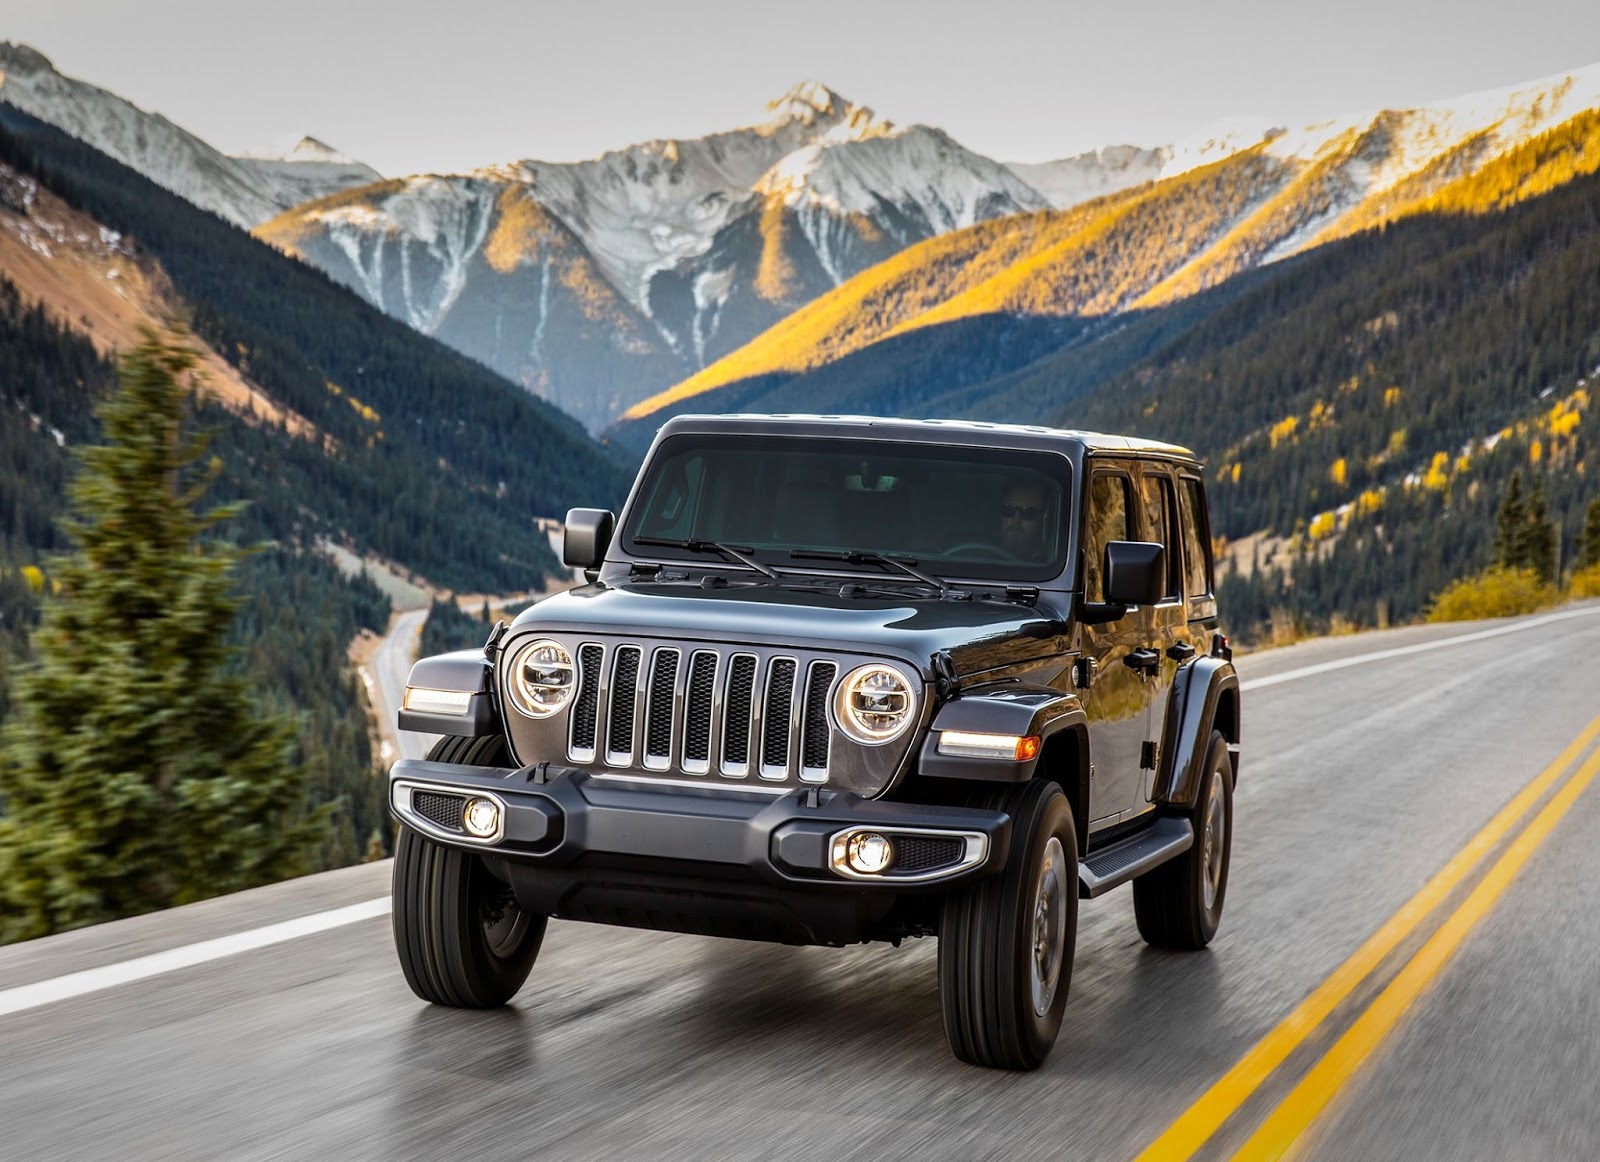 The all-new 2018 Jeep Wrangler unveiled ahead of LA Auto Show